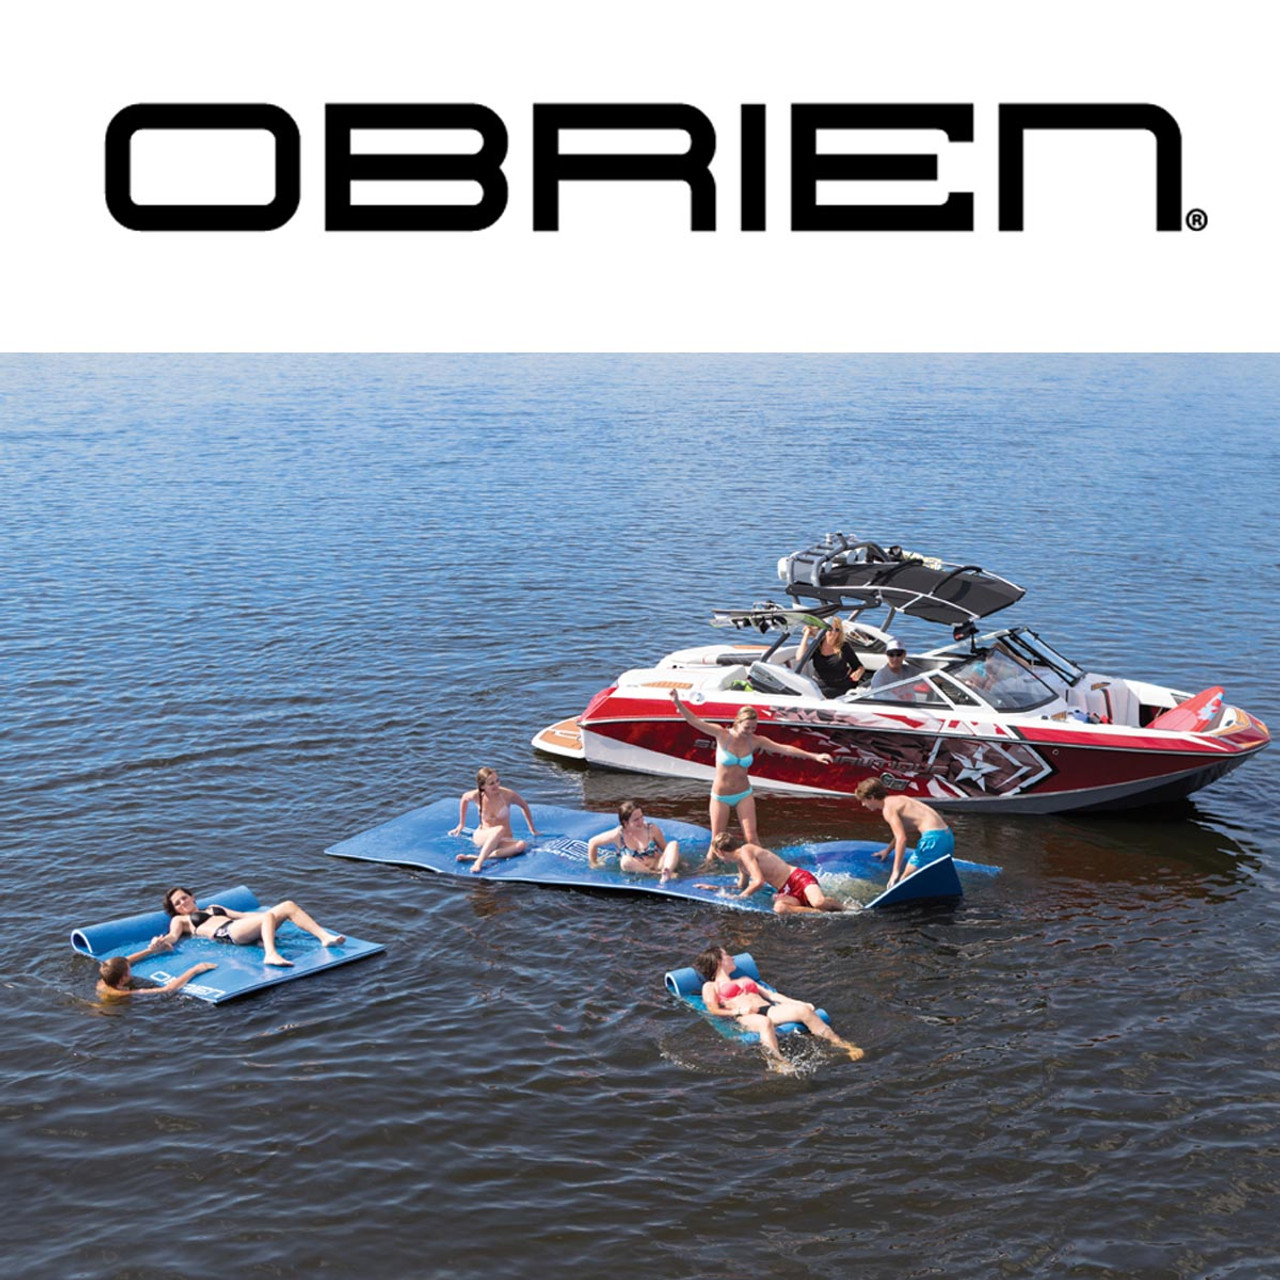 O'Brien Water Carpet for the Lowest Price at RIDE THE WAVE!